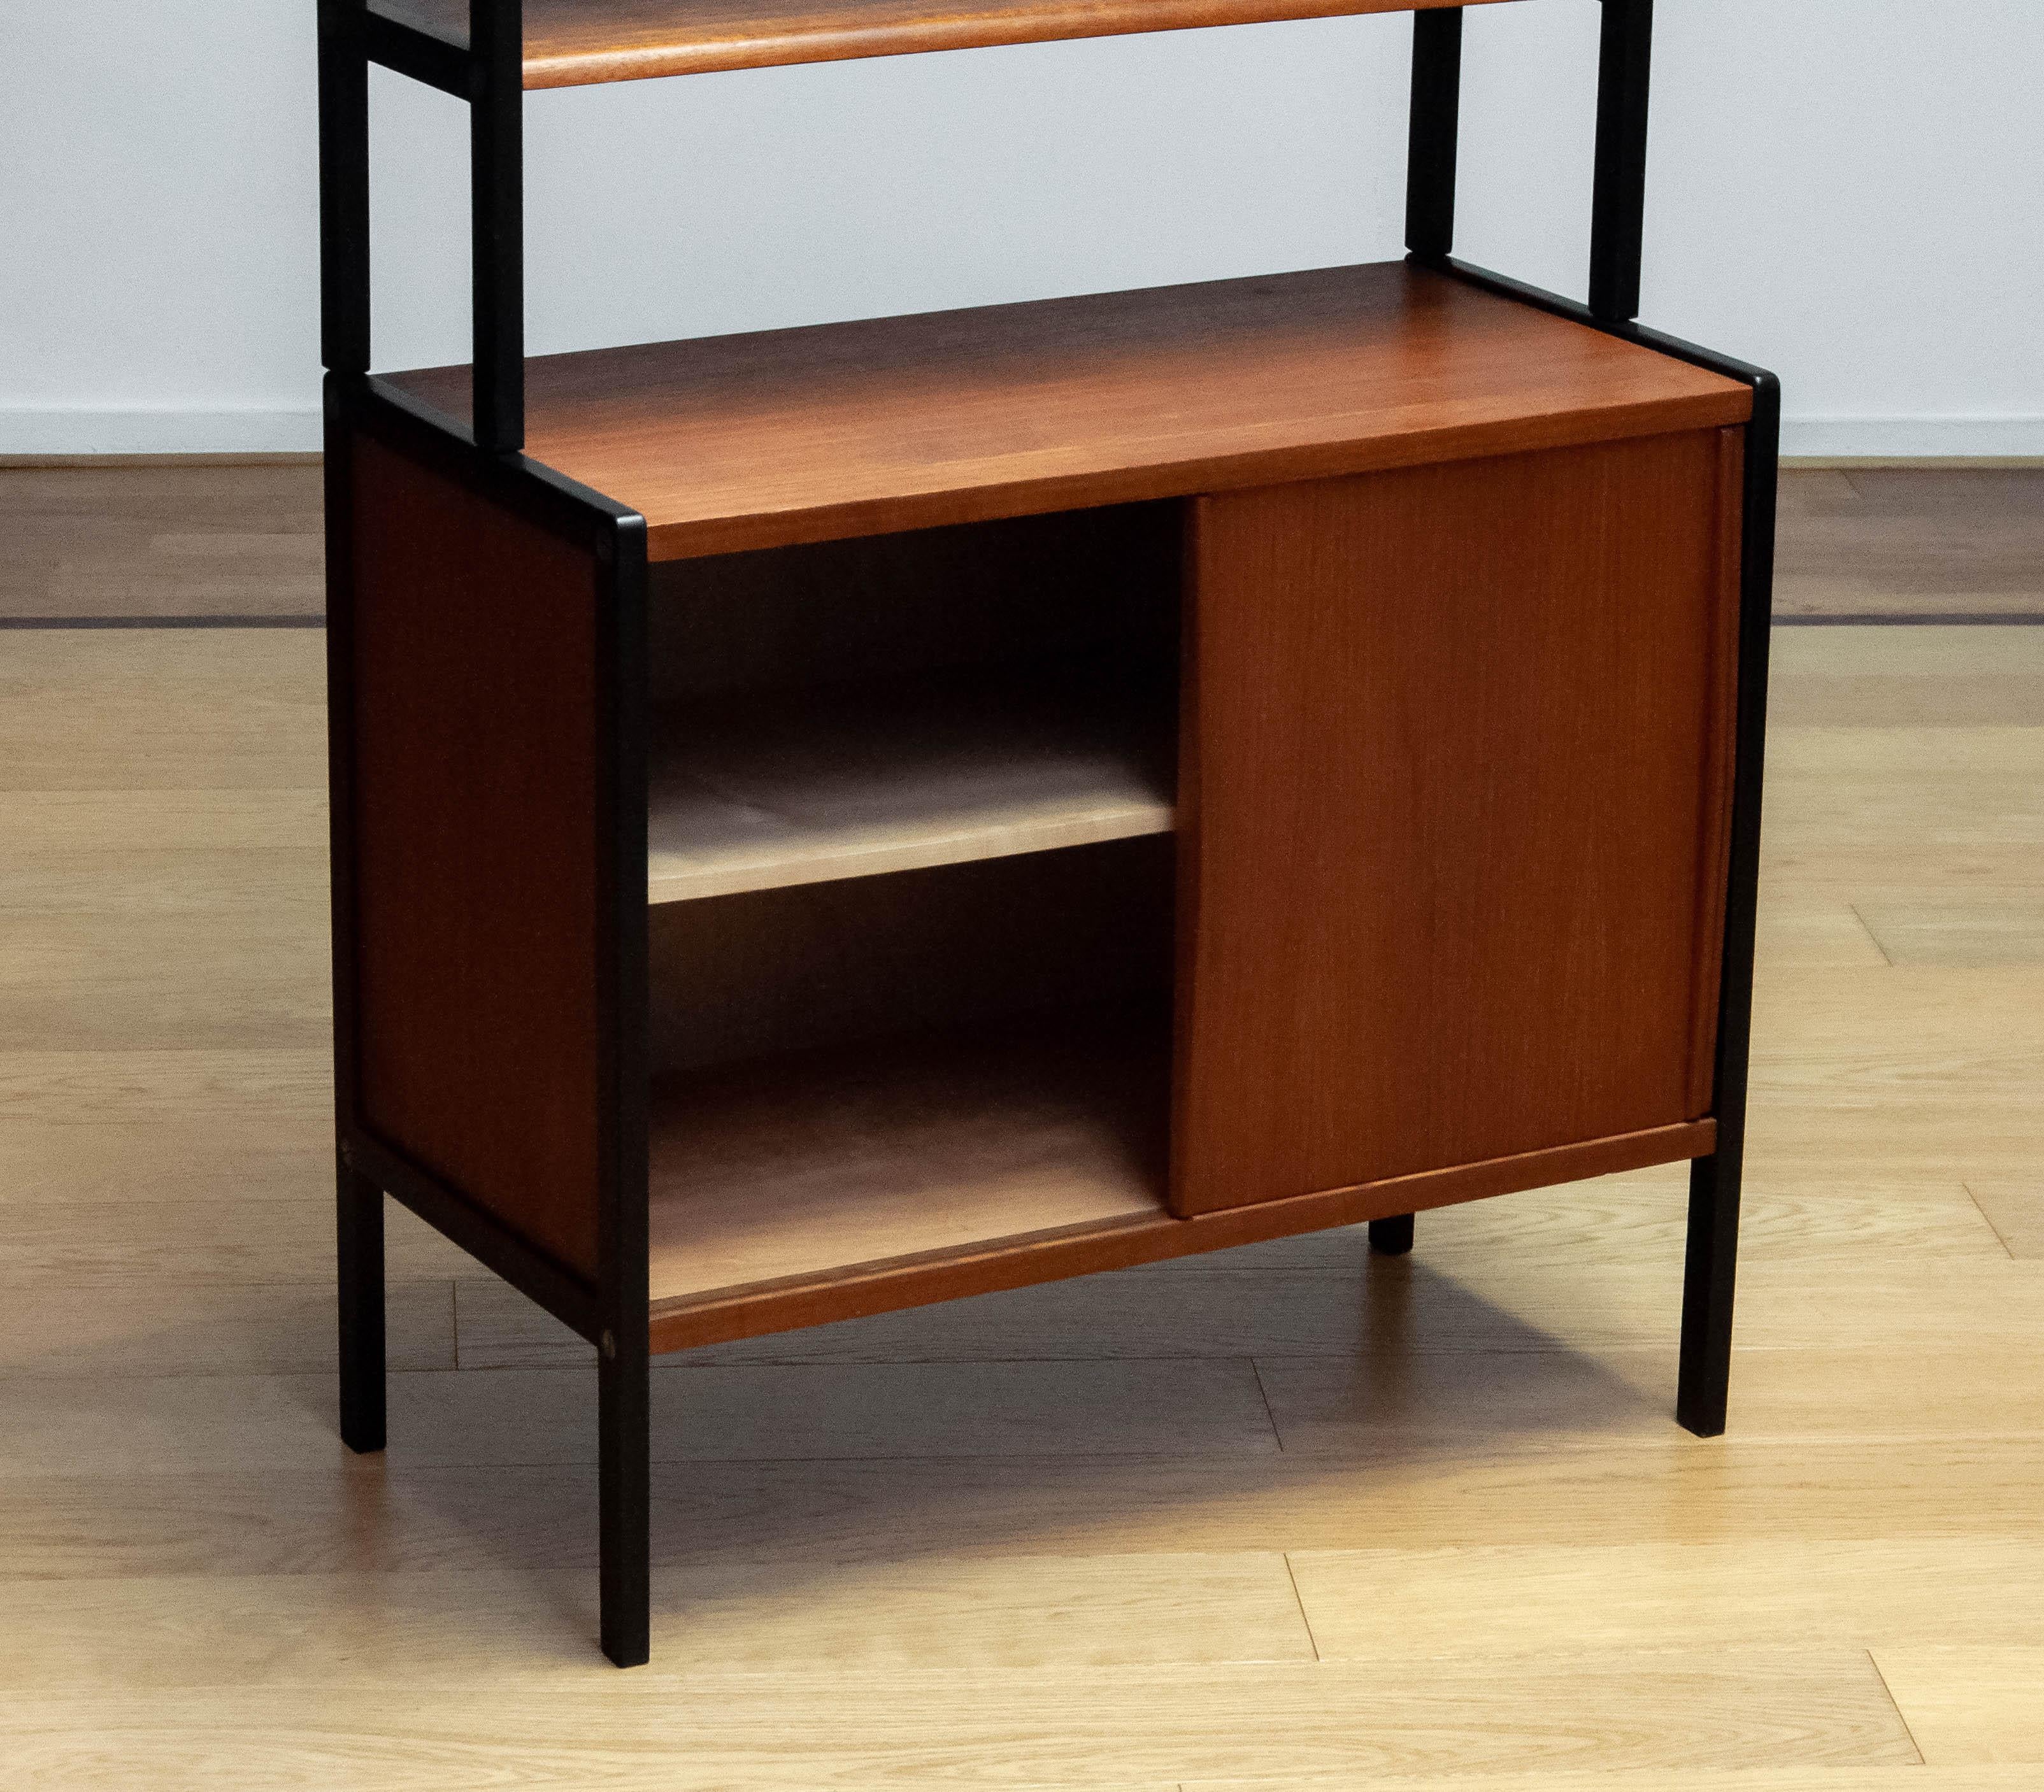 Swedish Scandinavian Bookcase In Teak With Black Lacquered Stands By Bertil Fridhagen 